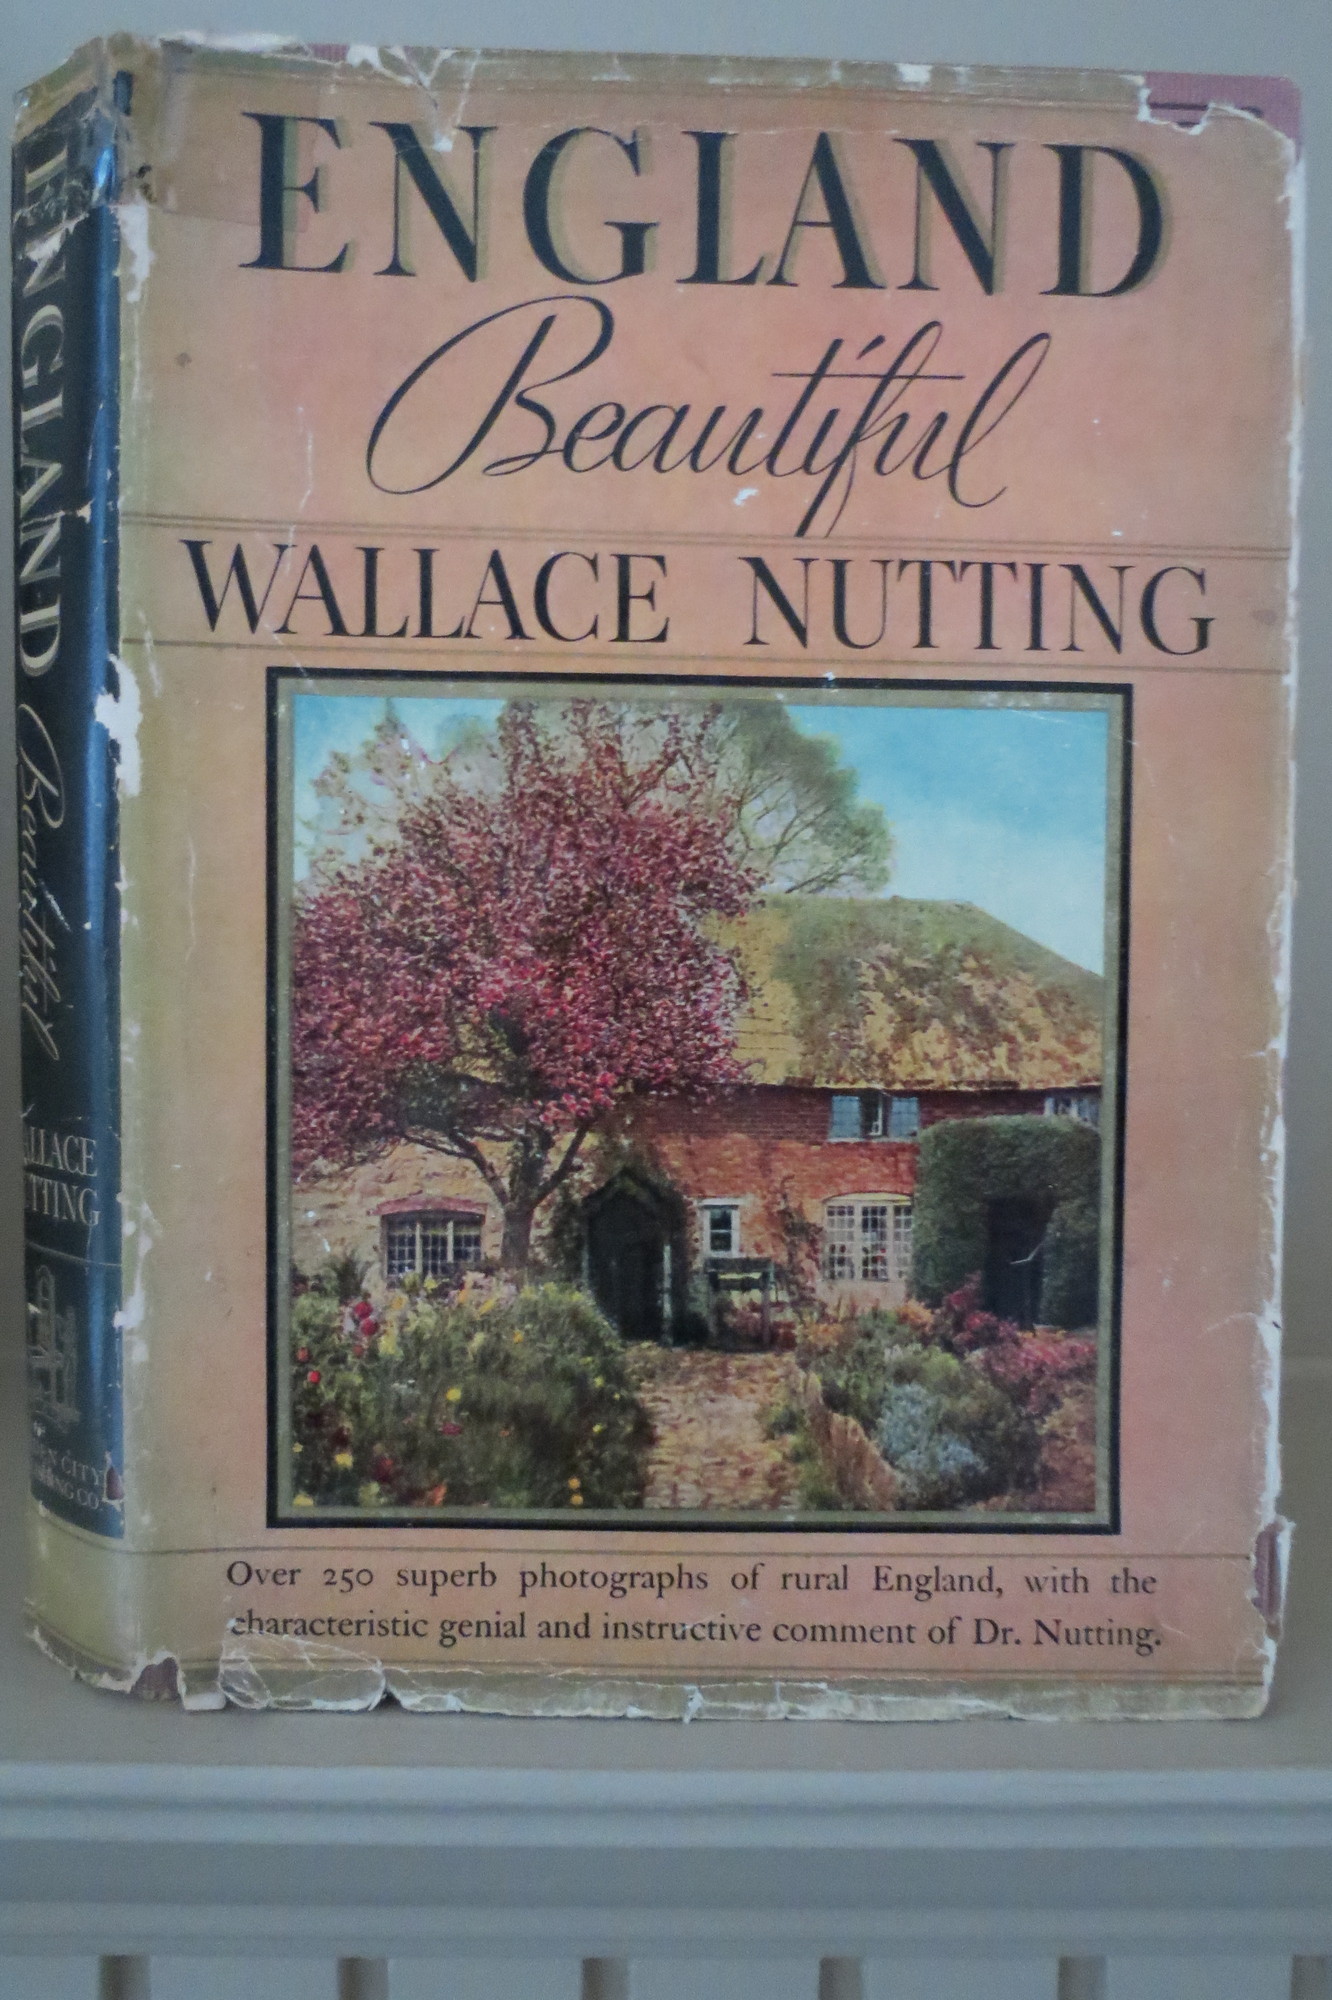 Image for ENGLAND BEAUTIFUL Illustrated by the Author with Pictures of Rural England with Special Reference to Their Aesthetic Features and Old Life (DJ protected by clear, acid-free mylar cover)